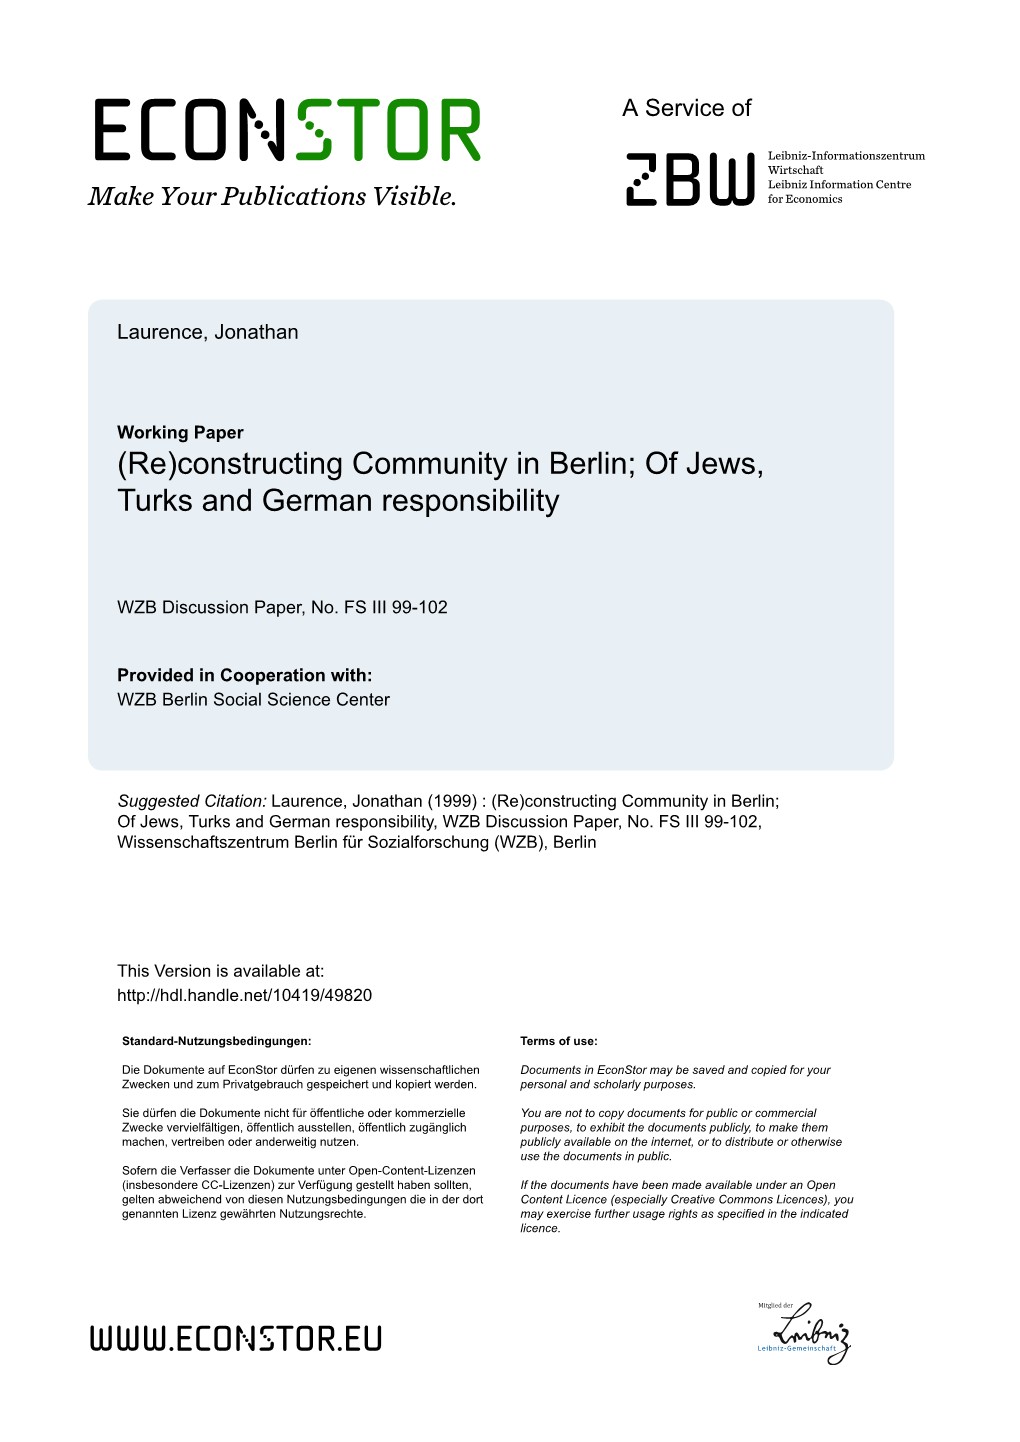 (Re)Constructing Community in Berlin. of Jews, Turks and German Responsibility